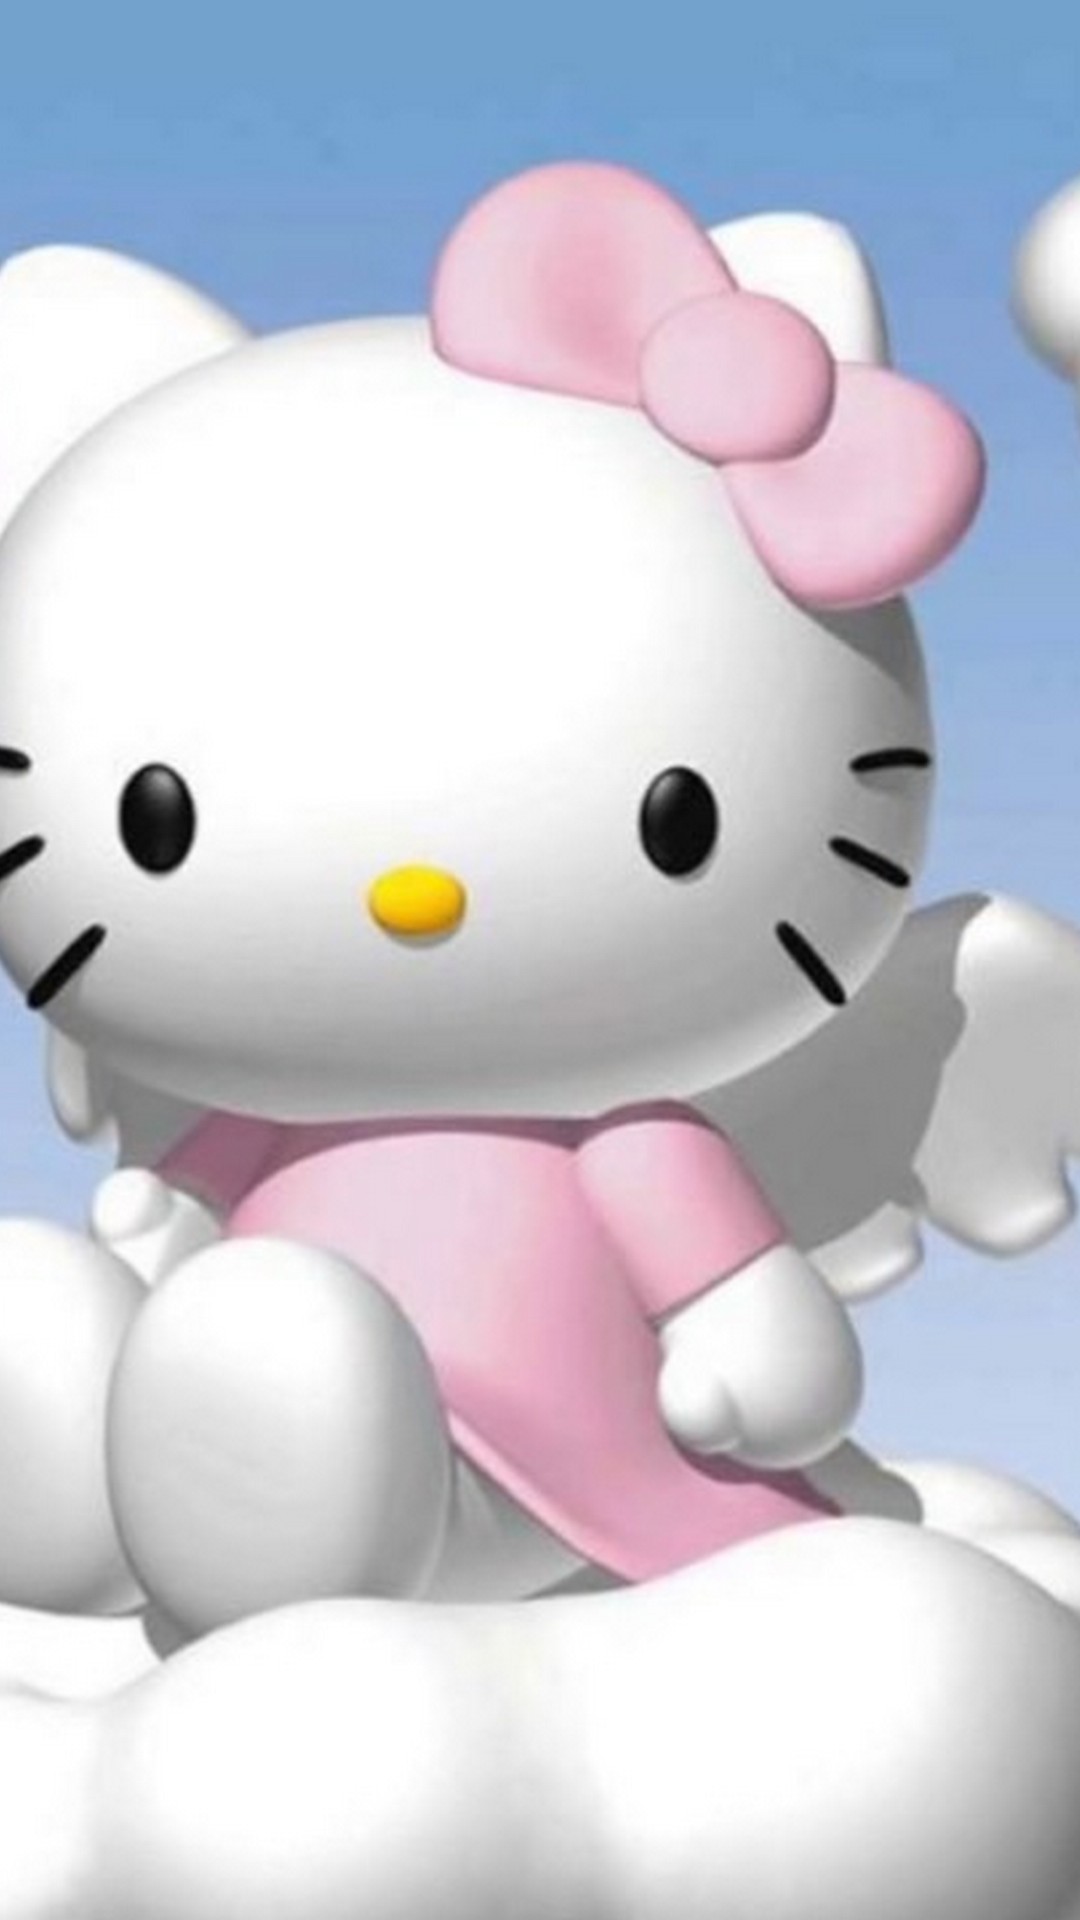 Hello Kitty Cellphone Wallpaper with image resolution 1080x1920 pixel. You can make this wallpaper for your Desktop Computer Backgrounds, Mac Wallpapers, Android Lock screen or iPhone Screensavers